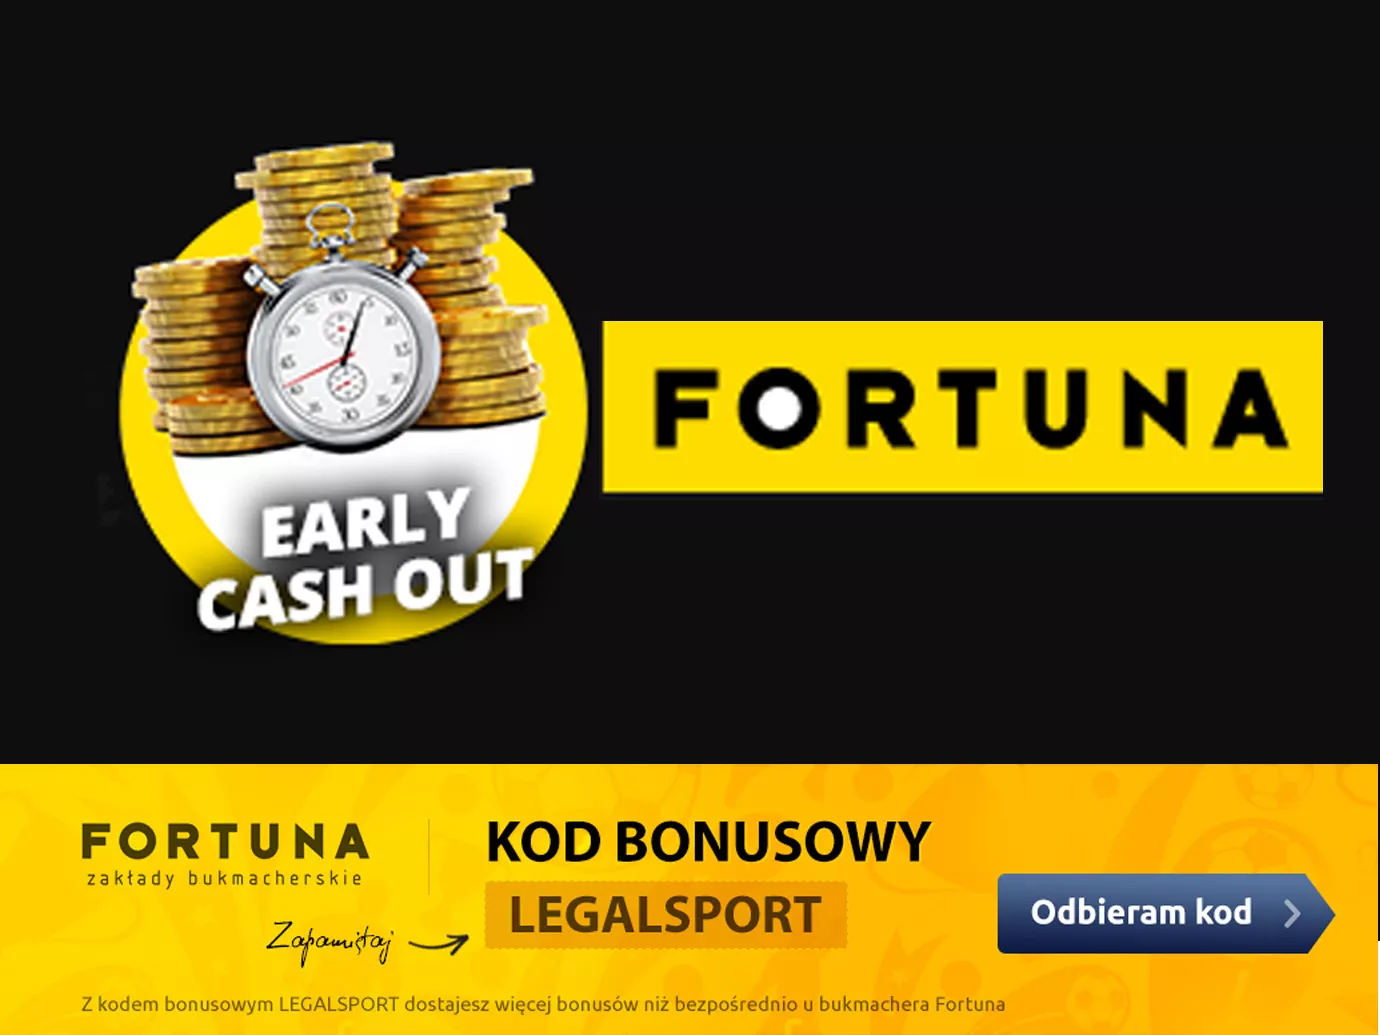 Early cash-out w Fortunie